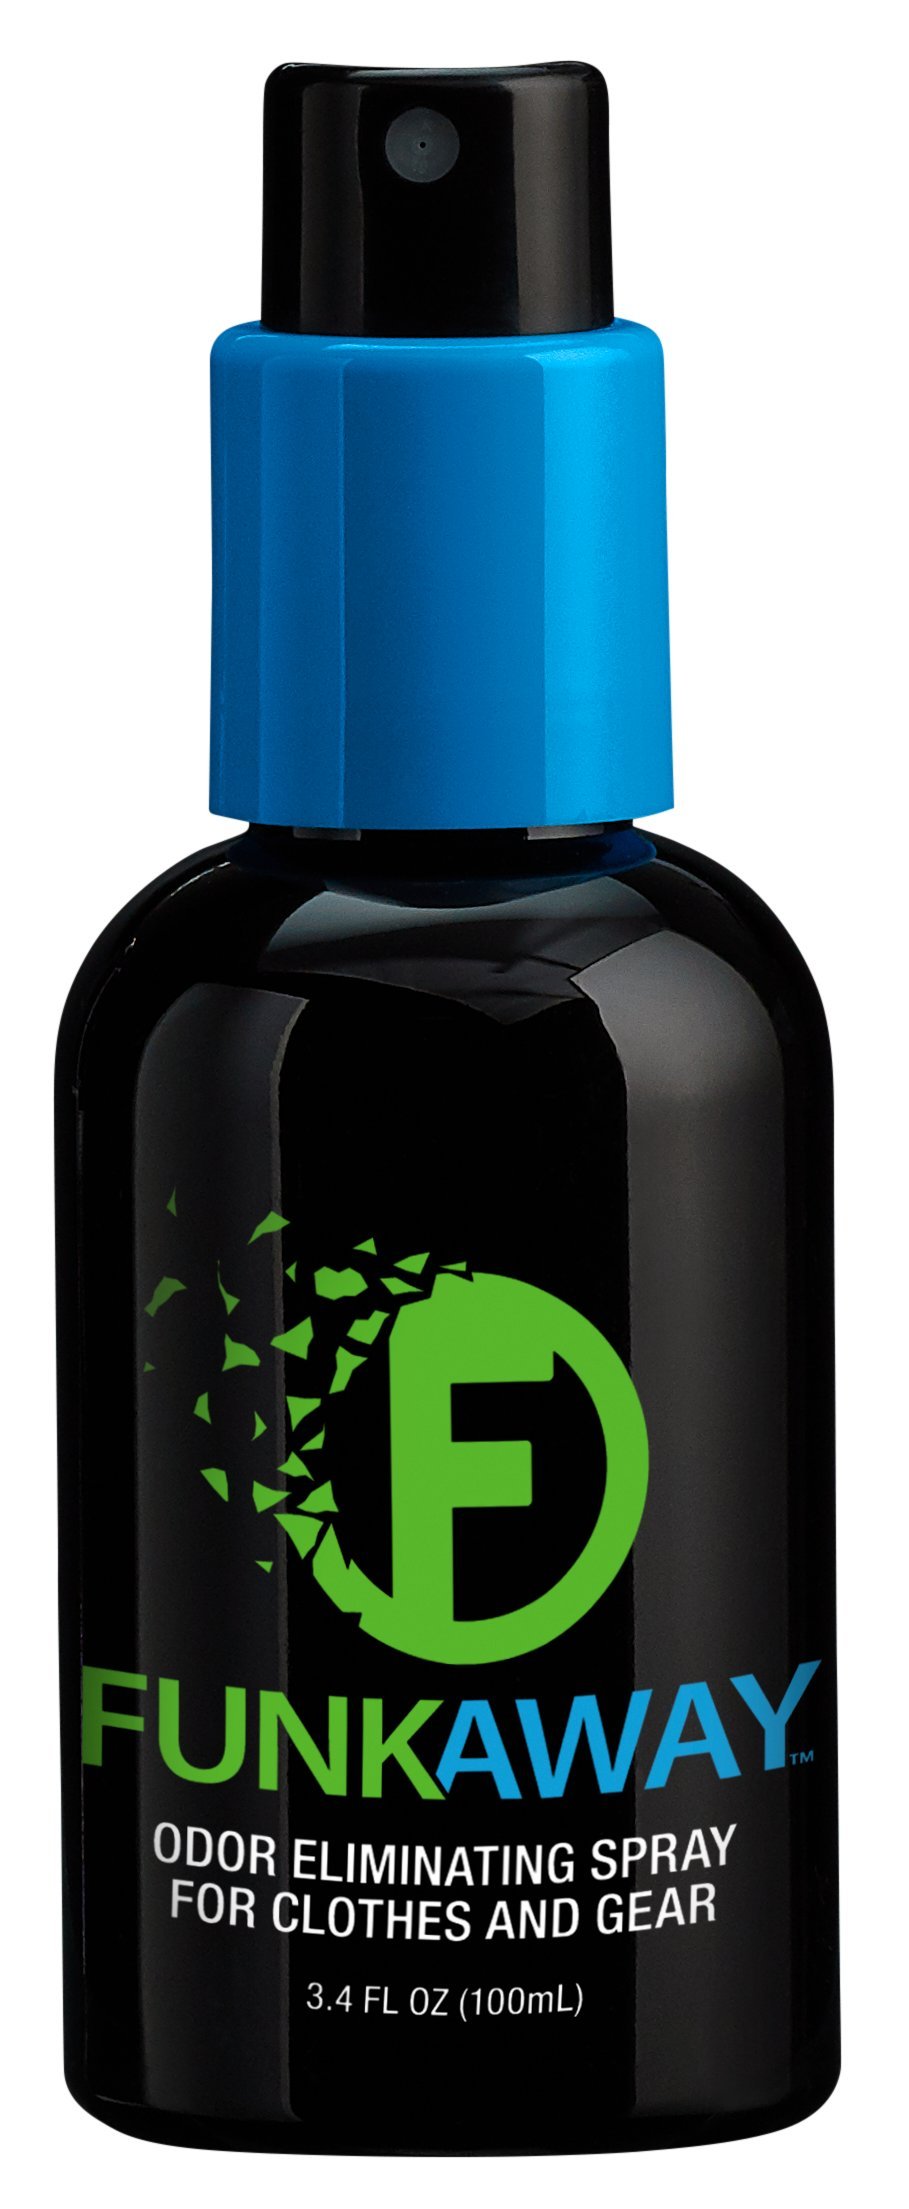 3.4-Oz FunkAway Odor Eliminator Spray for Shoes, Clothes & Gear $3.79 w/ S&S + Free Shipping w/ Prime or on $35+